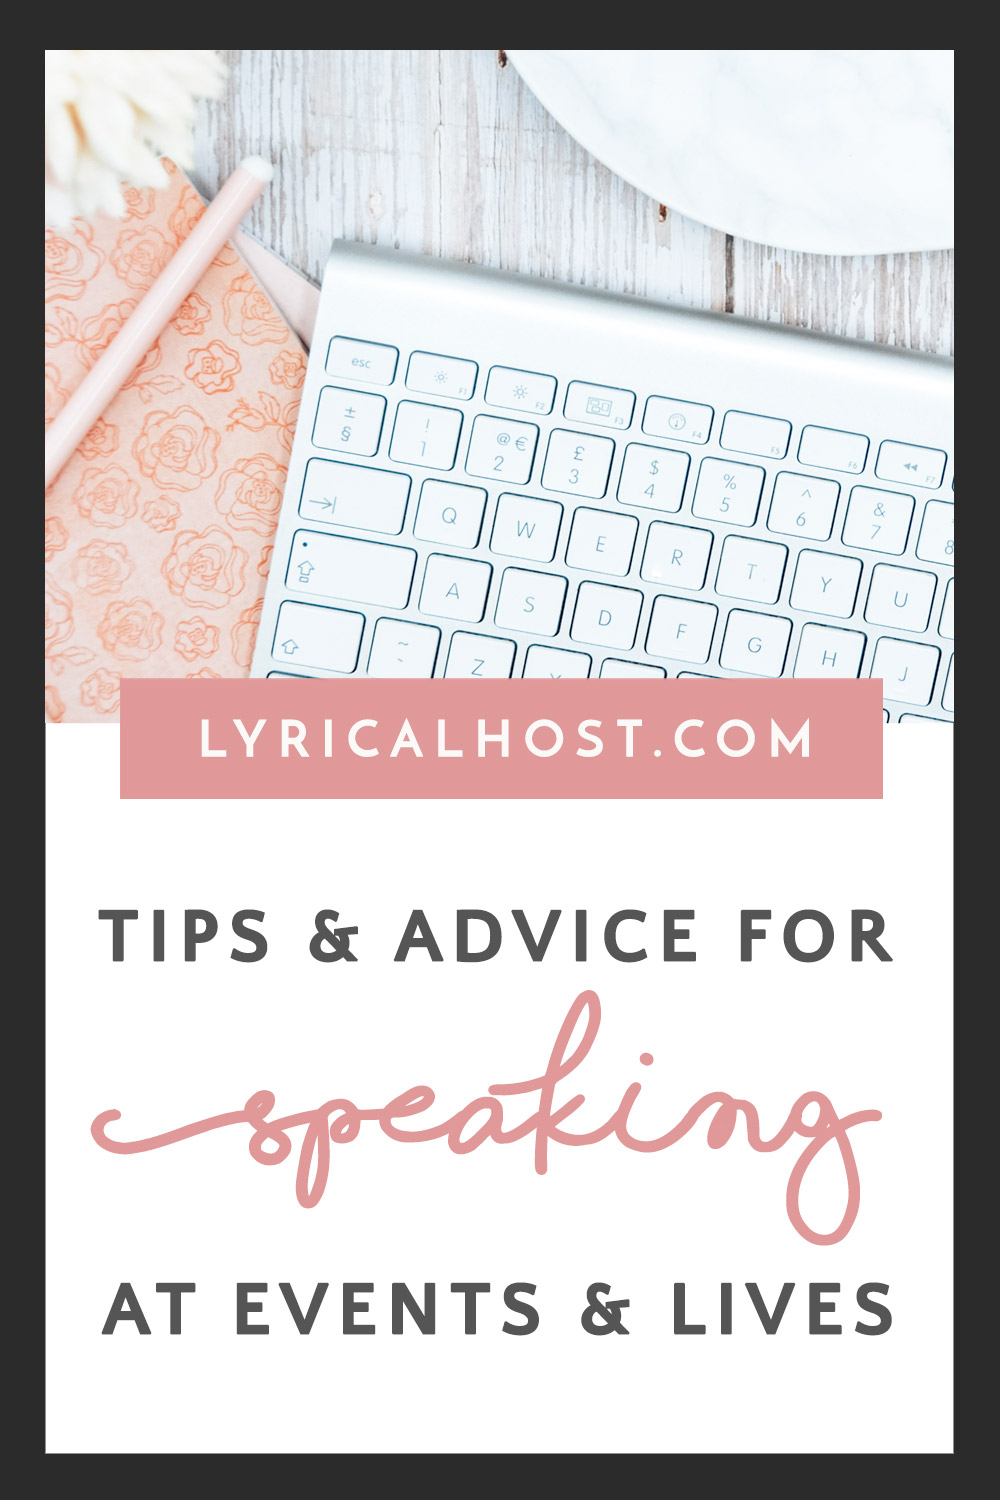 Tips & Advice For Speaking At Events, Lives & More!